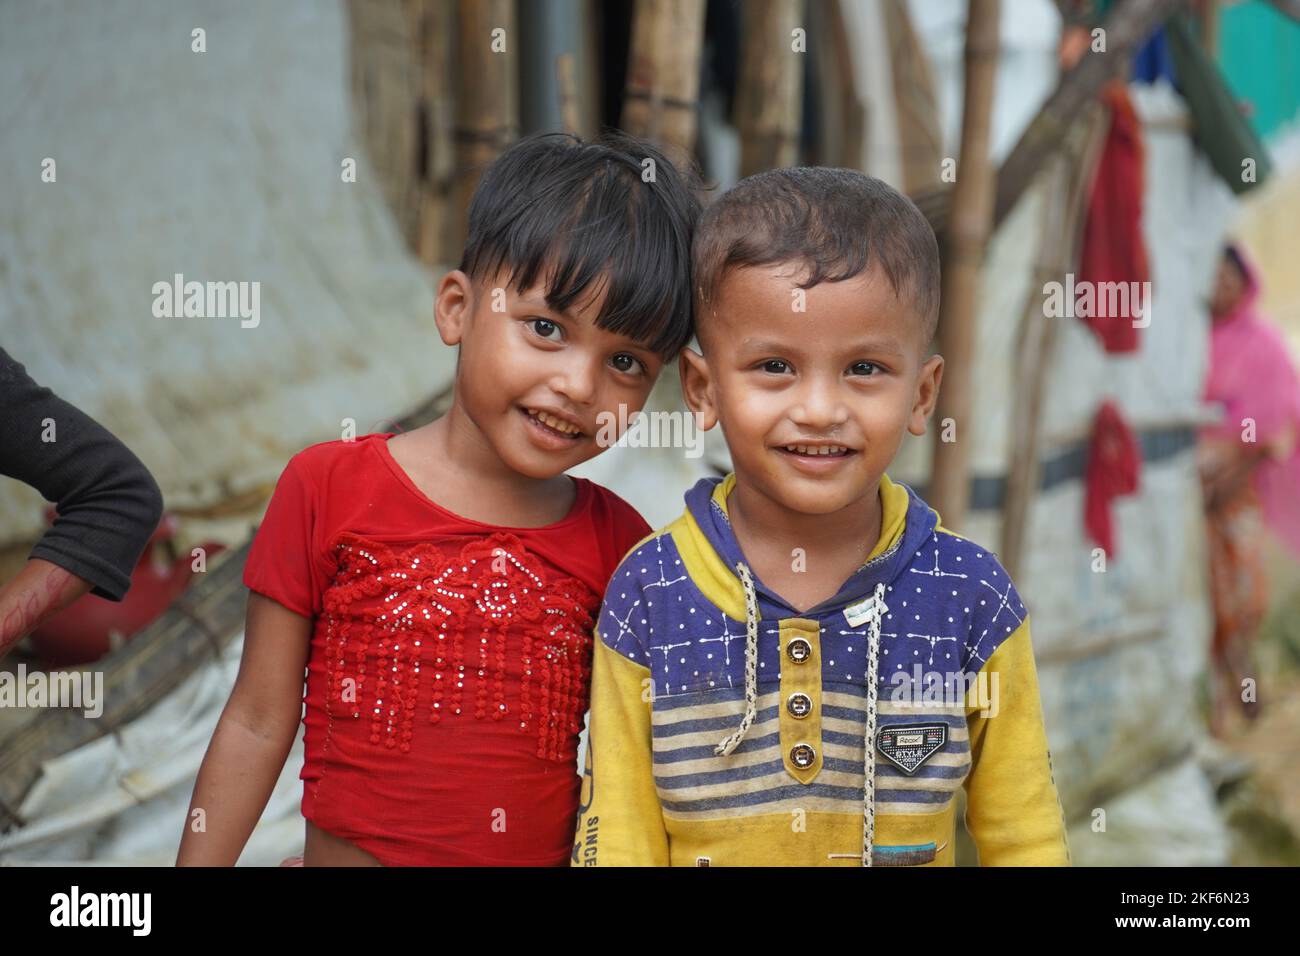 Two Rohingya kids pose smiling at the Rohingya Refugee camp in Cox's Bazar. More than a million Rohingya refugees live there. Stock Photo